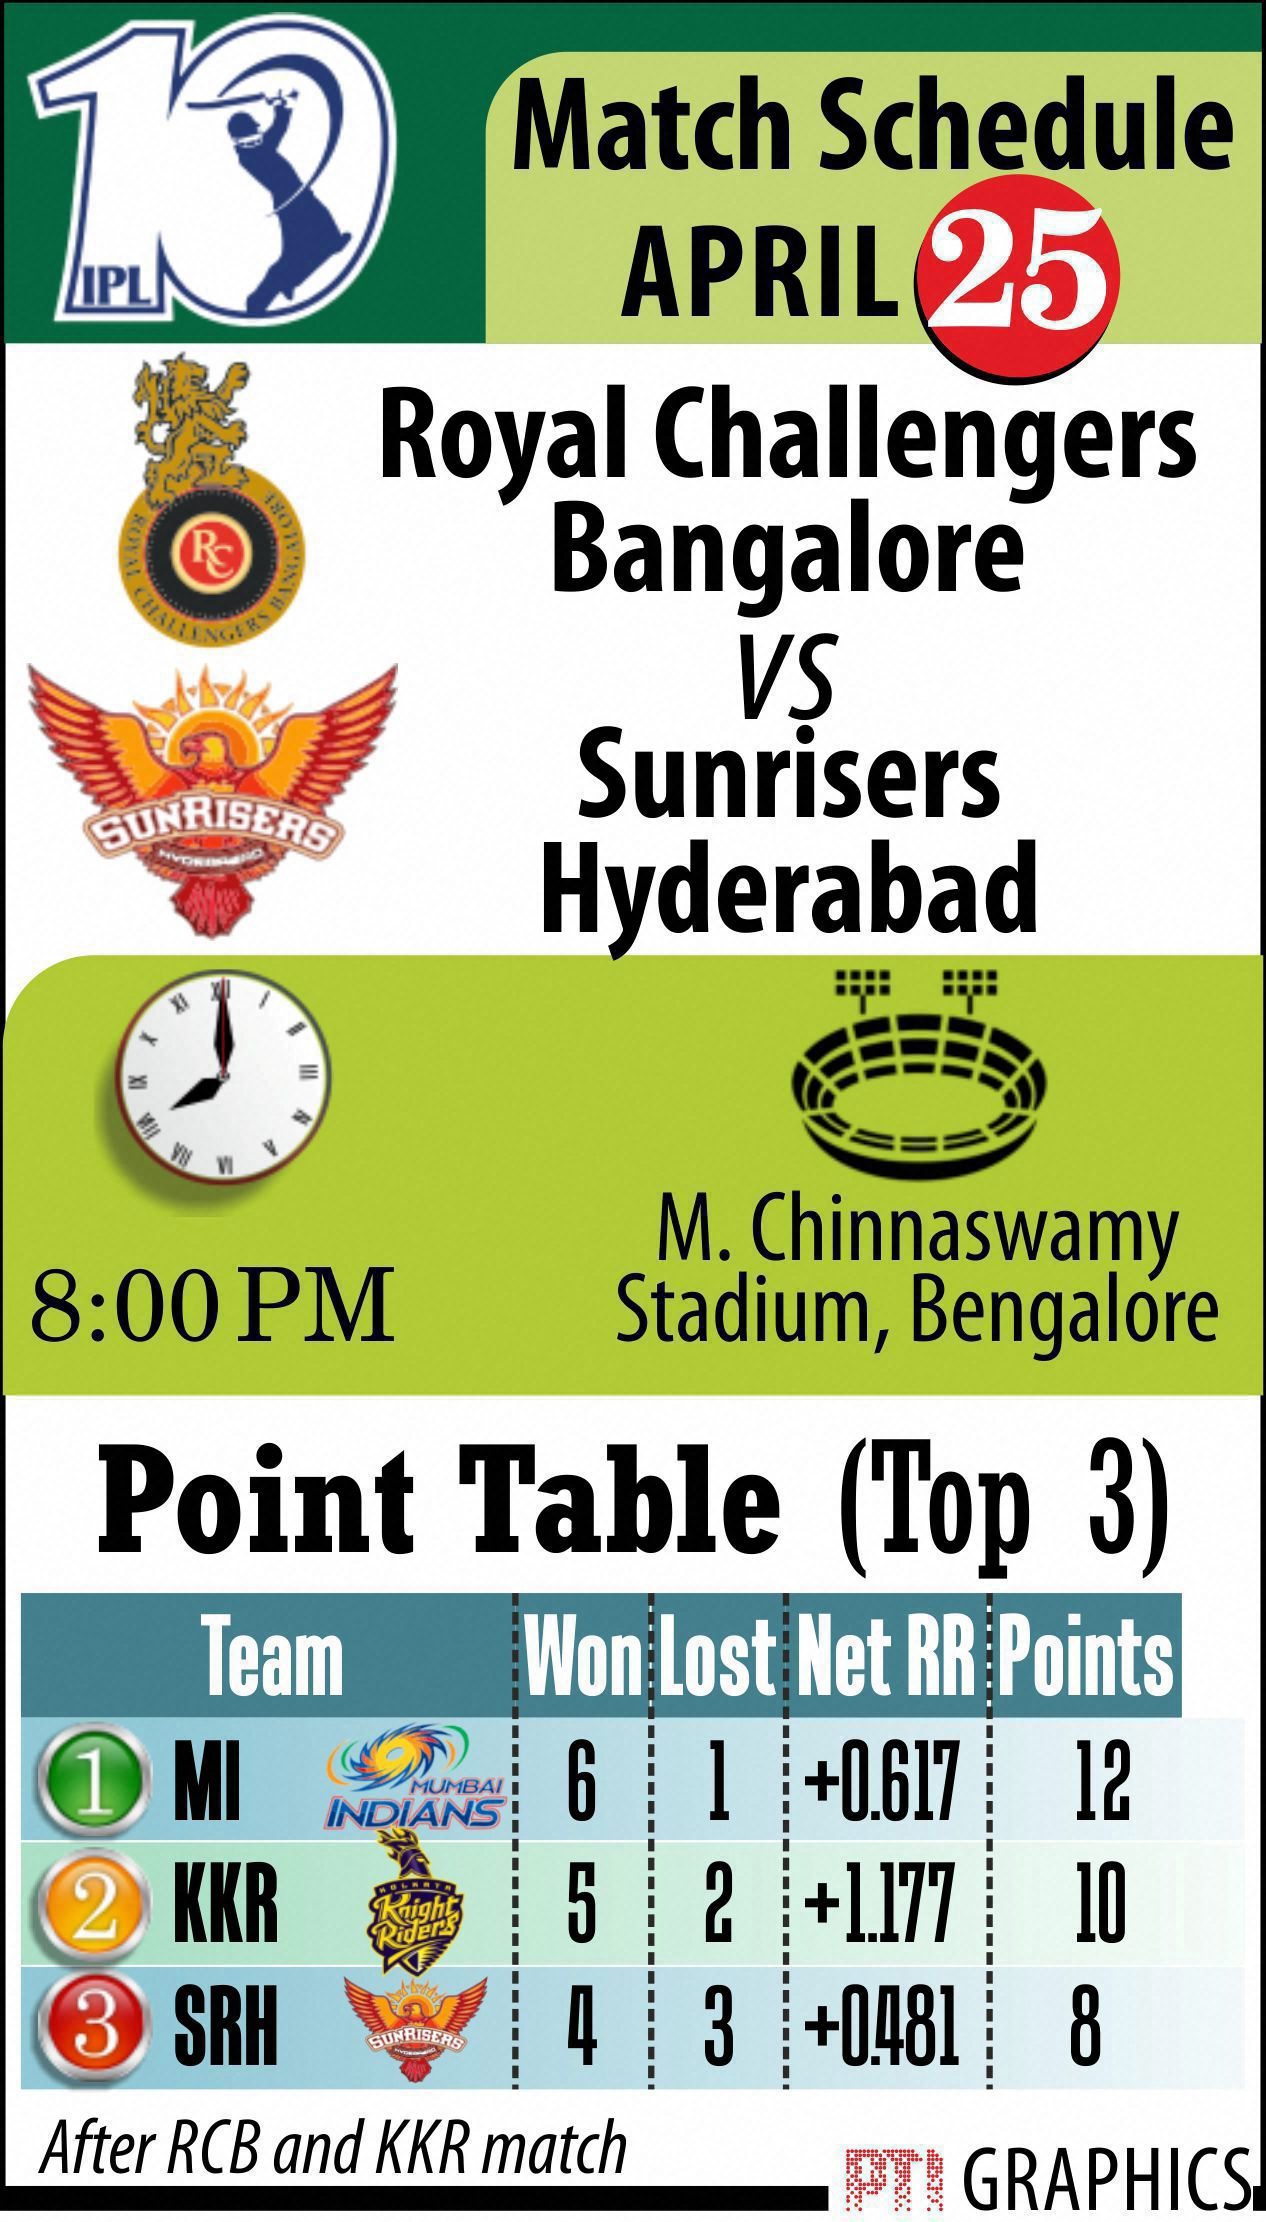 IPL Match Schedule - The Shillong Times